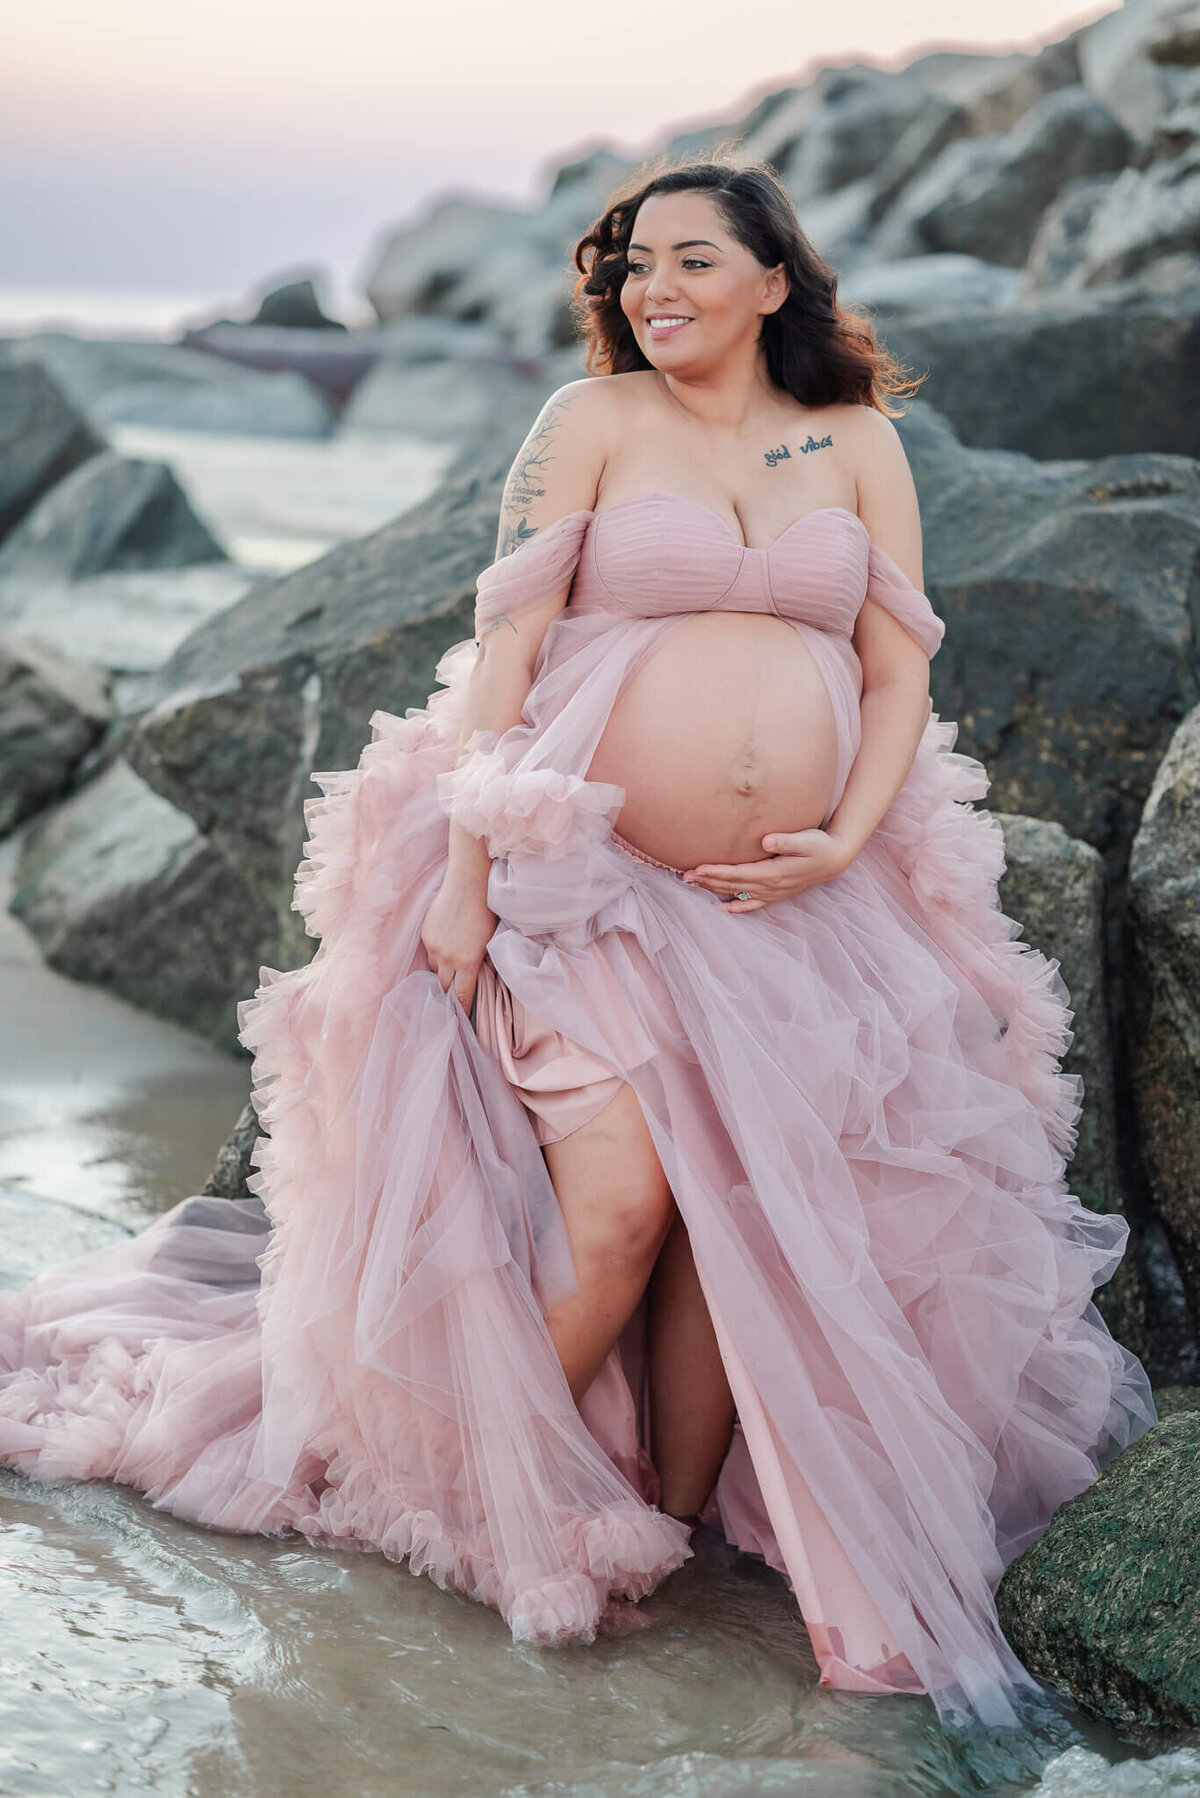 A pregnant woman stands near some rocks on the beach. She holds her pink tulle skirt up while a wave comes in.